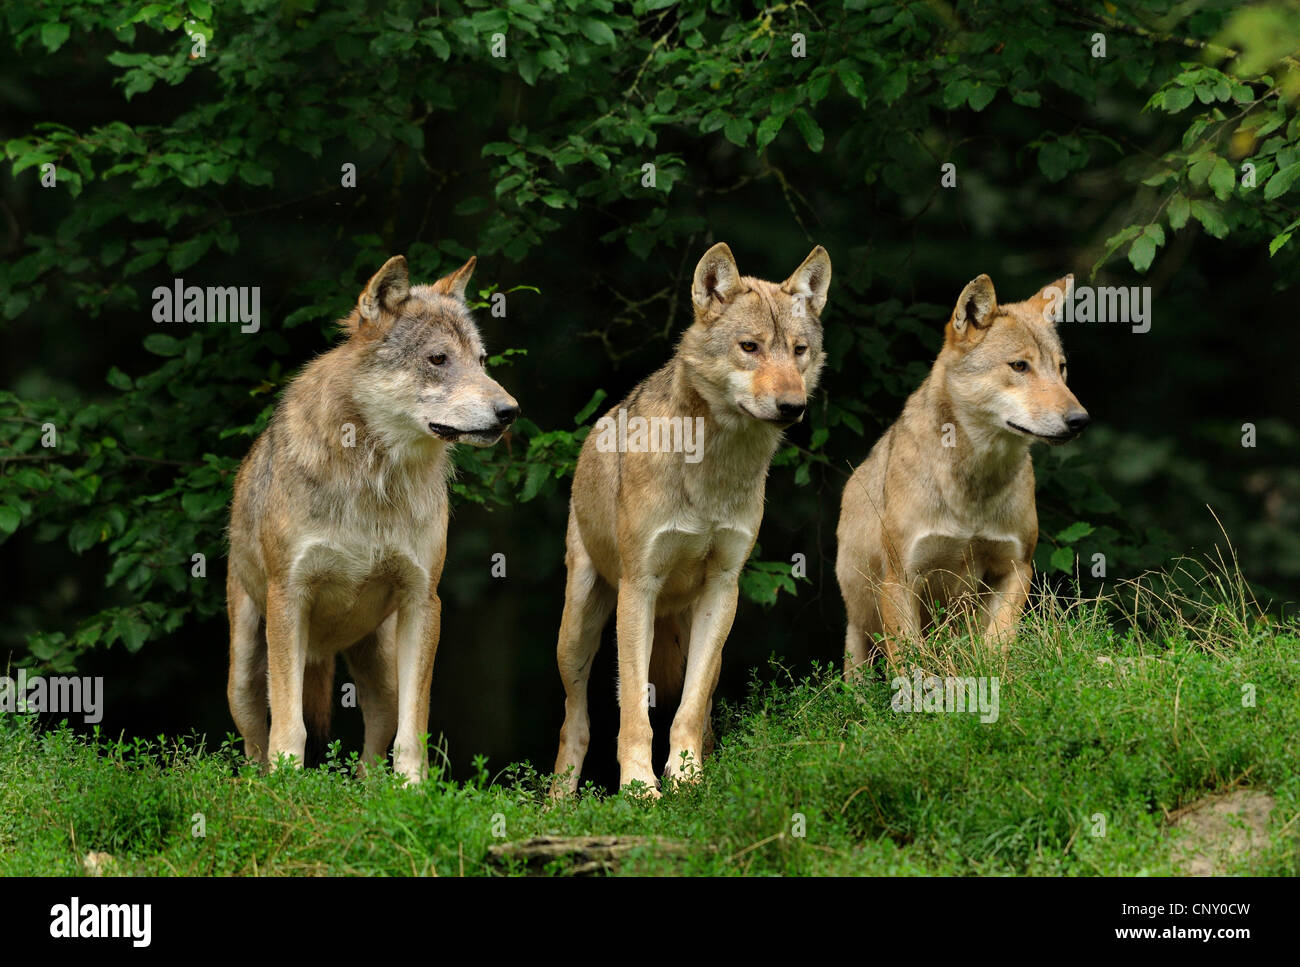 timber wolf (Canis lupus lycaon), three animals standing side by side at the edge of a forest (NO PERMISSION FOR HUNTING TOPICS) Stock Photo